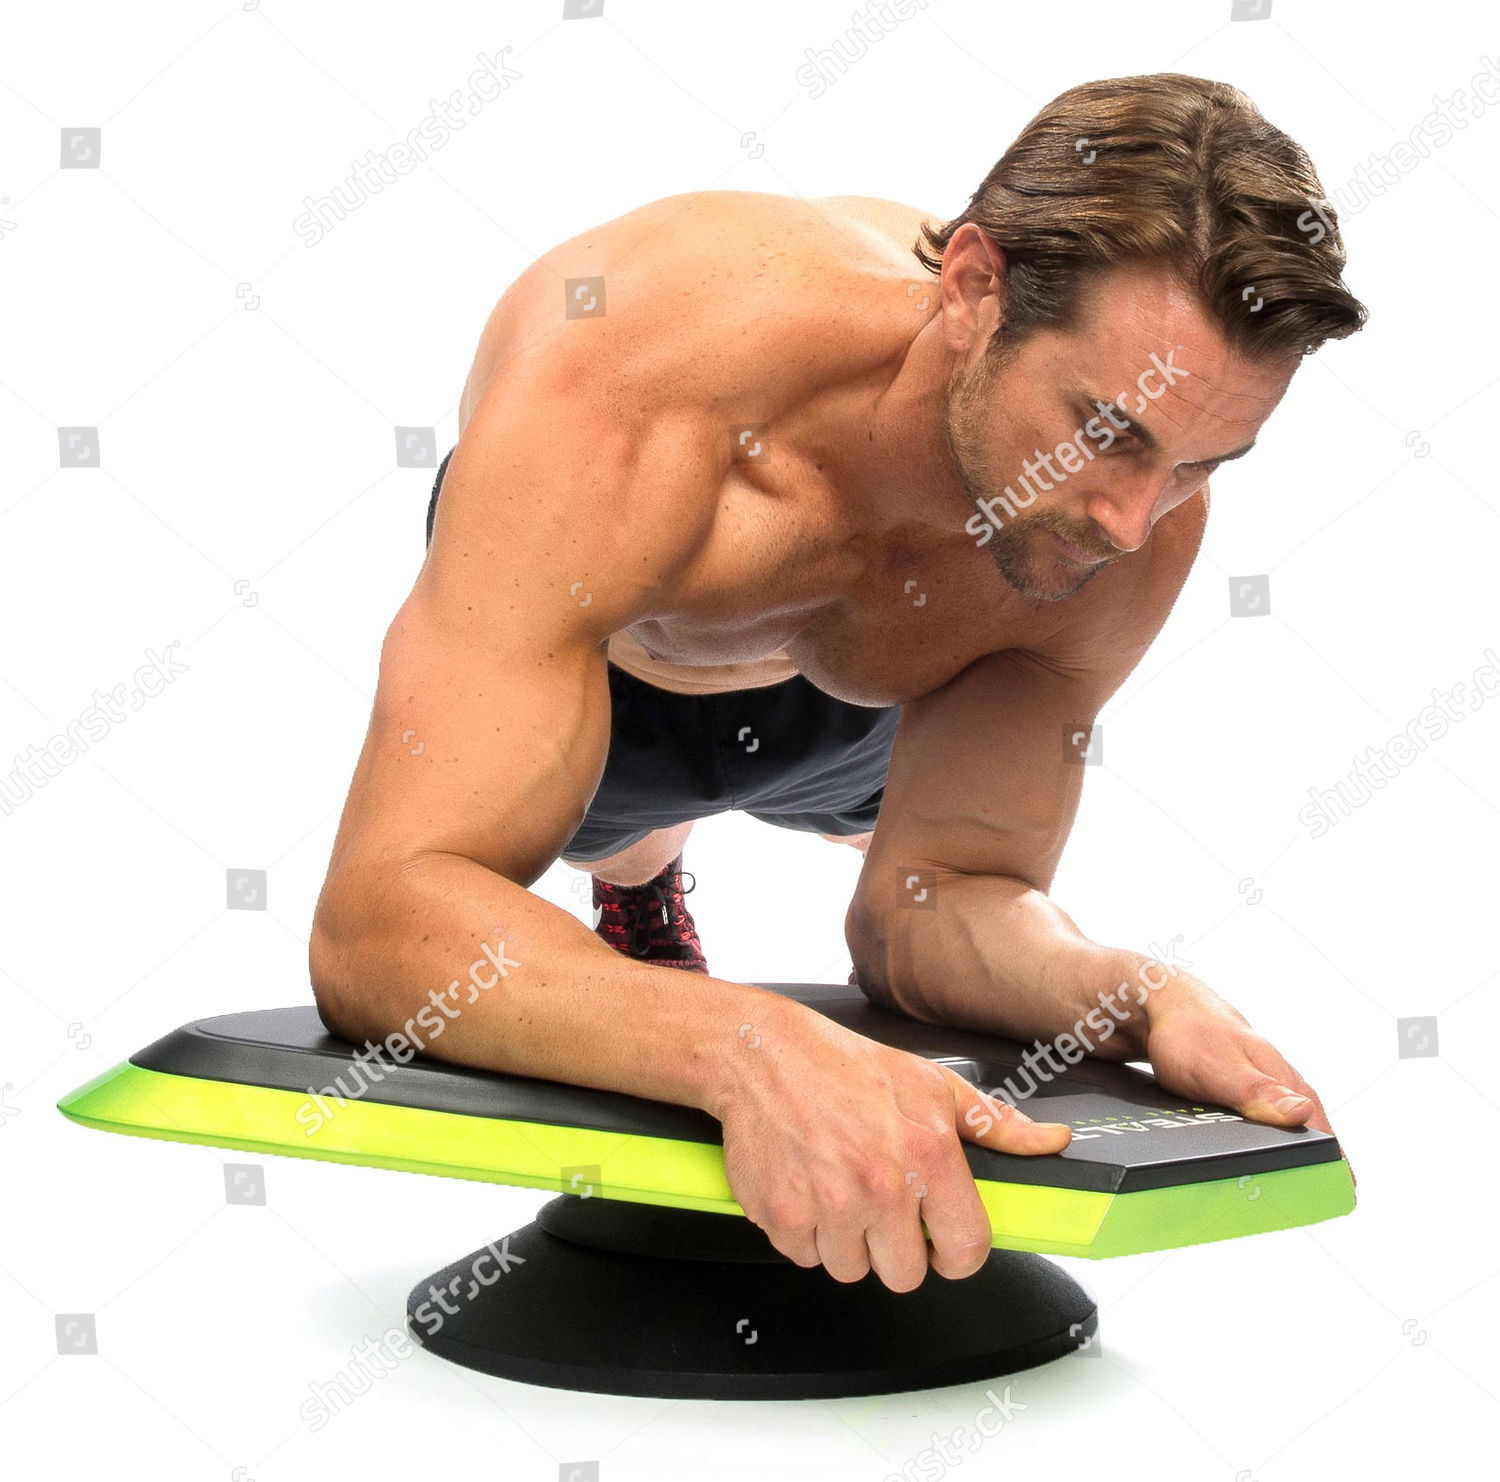 Stealth Fitness Board Editorial Stock Photo Stock Image